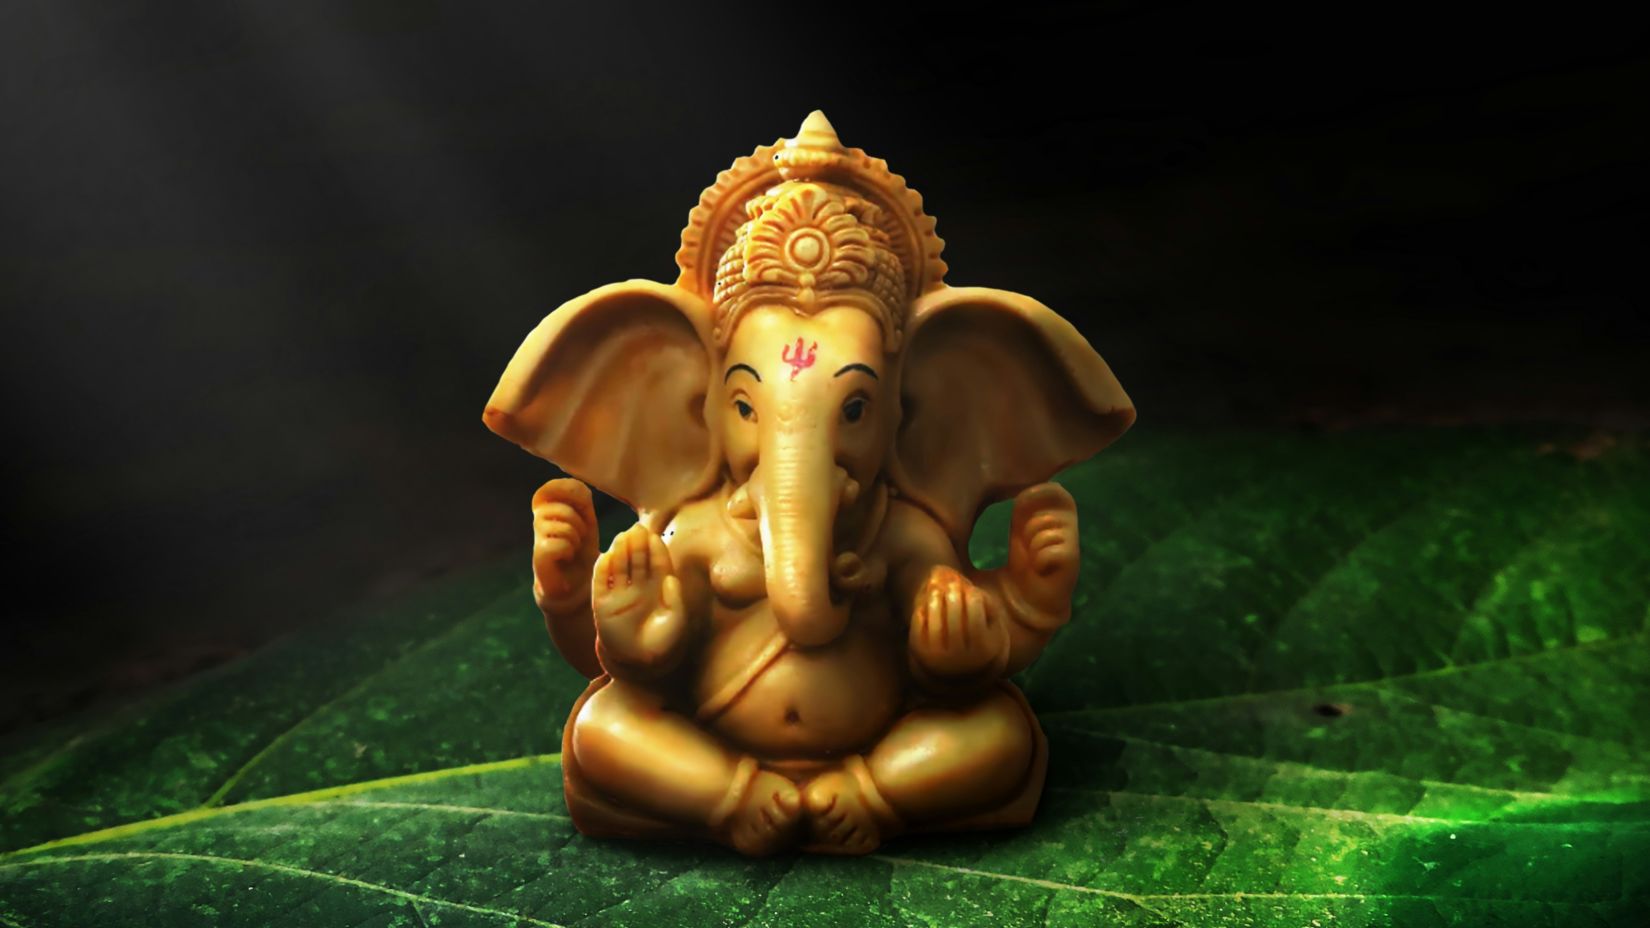 an idol of ganesha kept on a green table with the background blurred